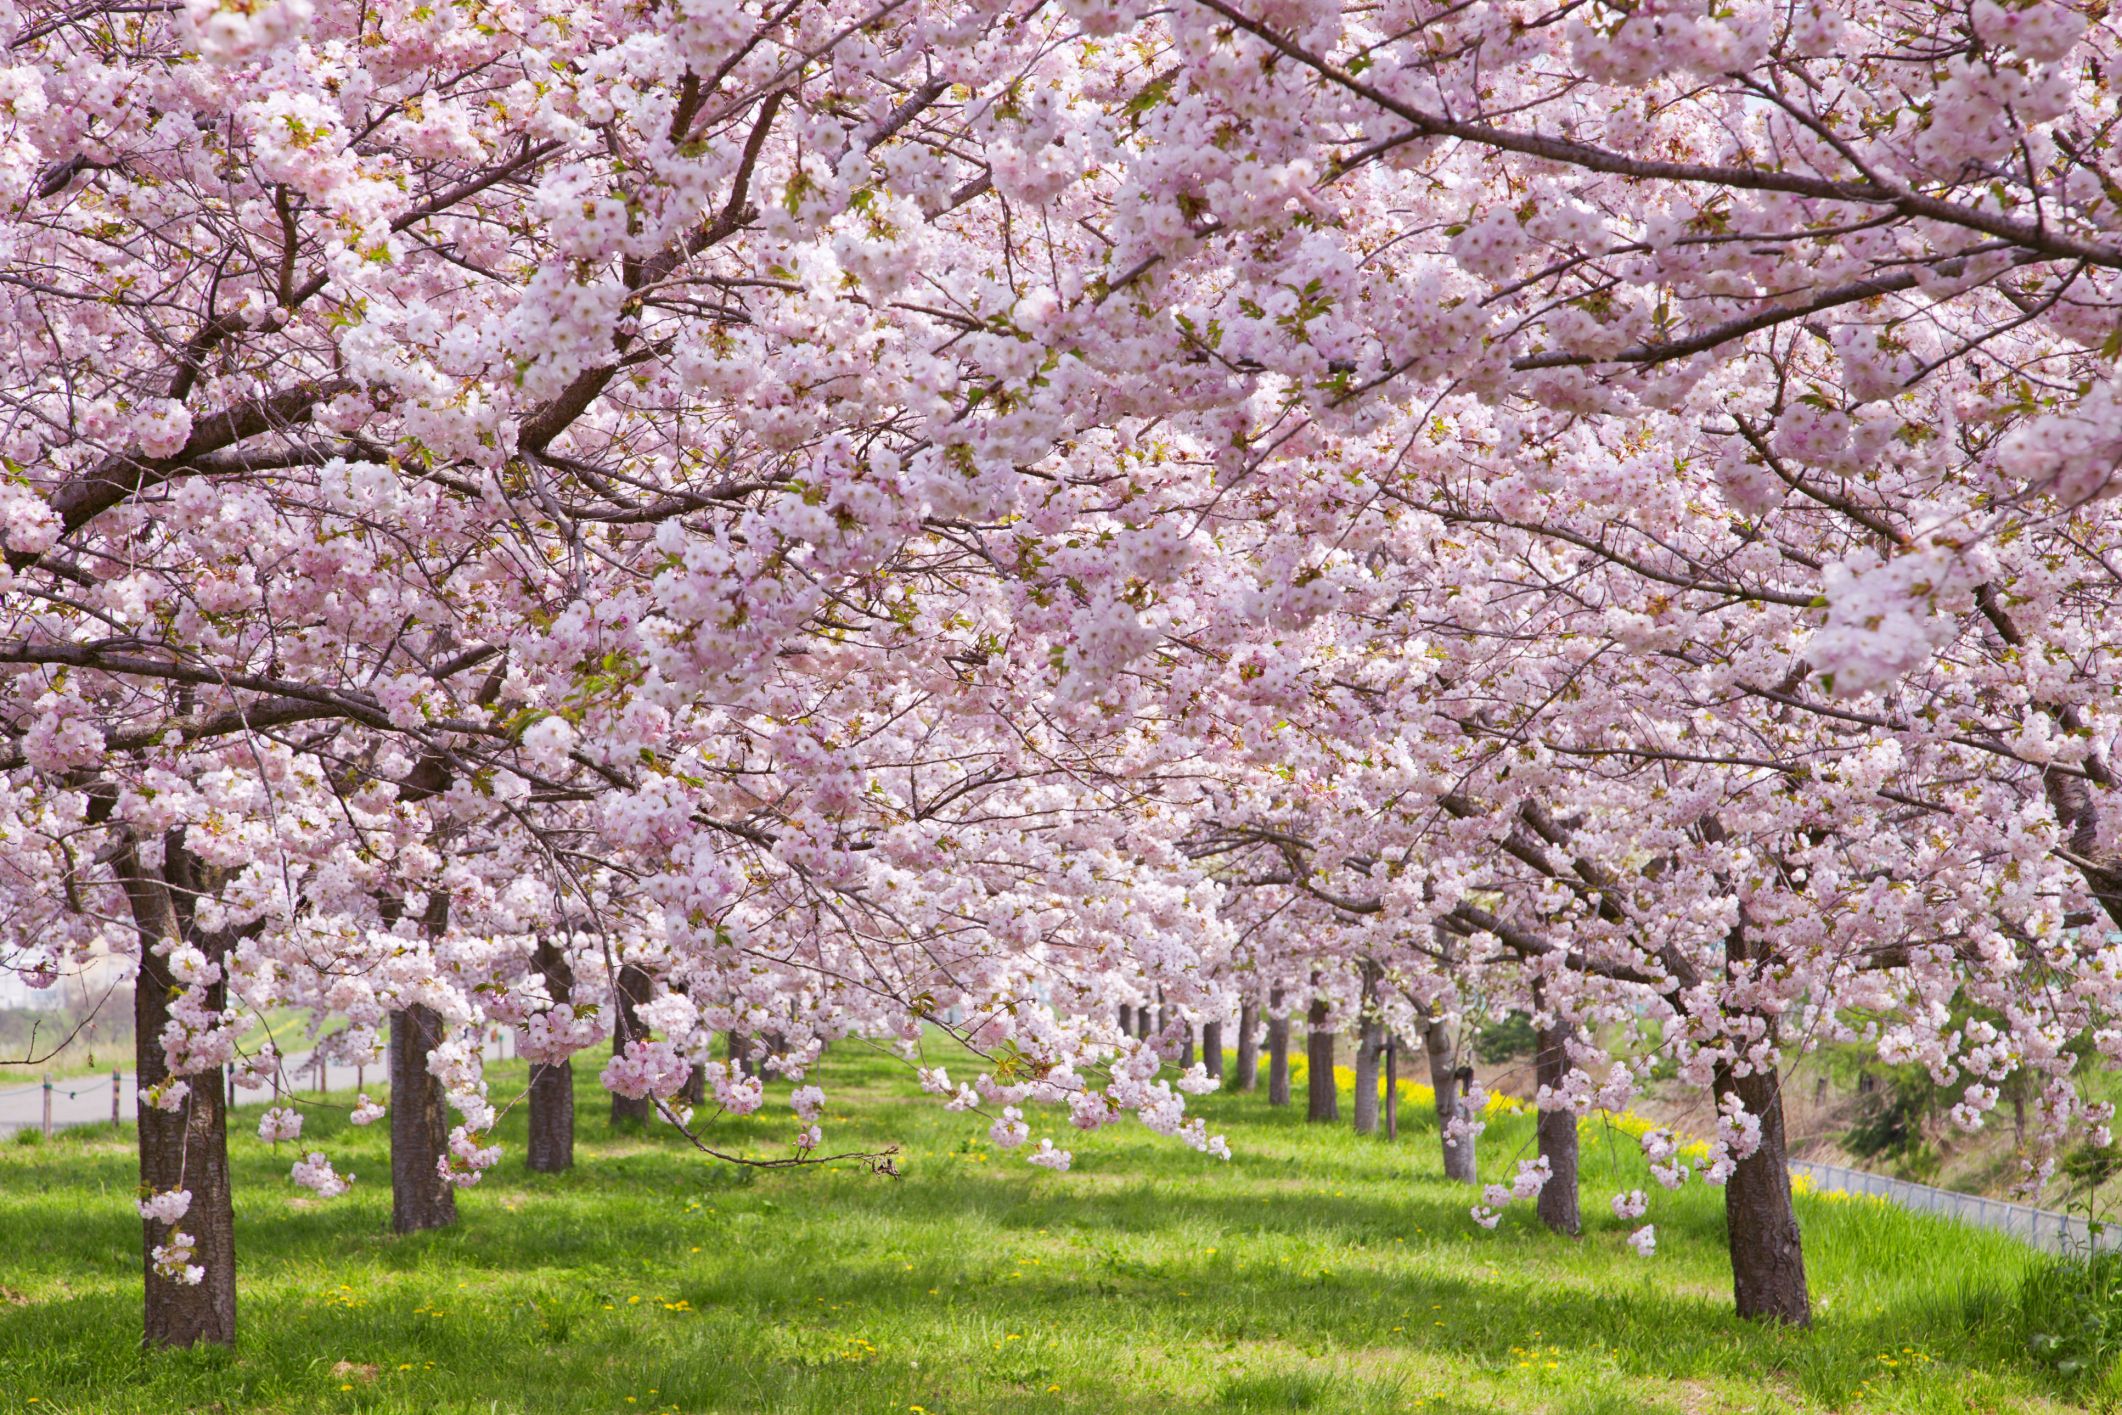 17 facts to know about Sakura flowers